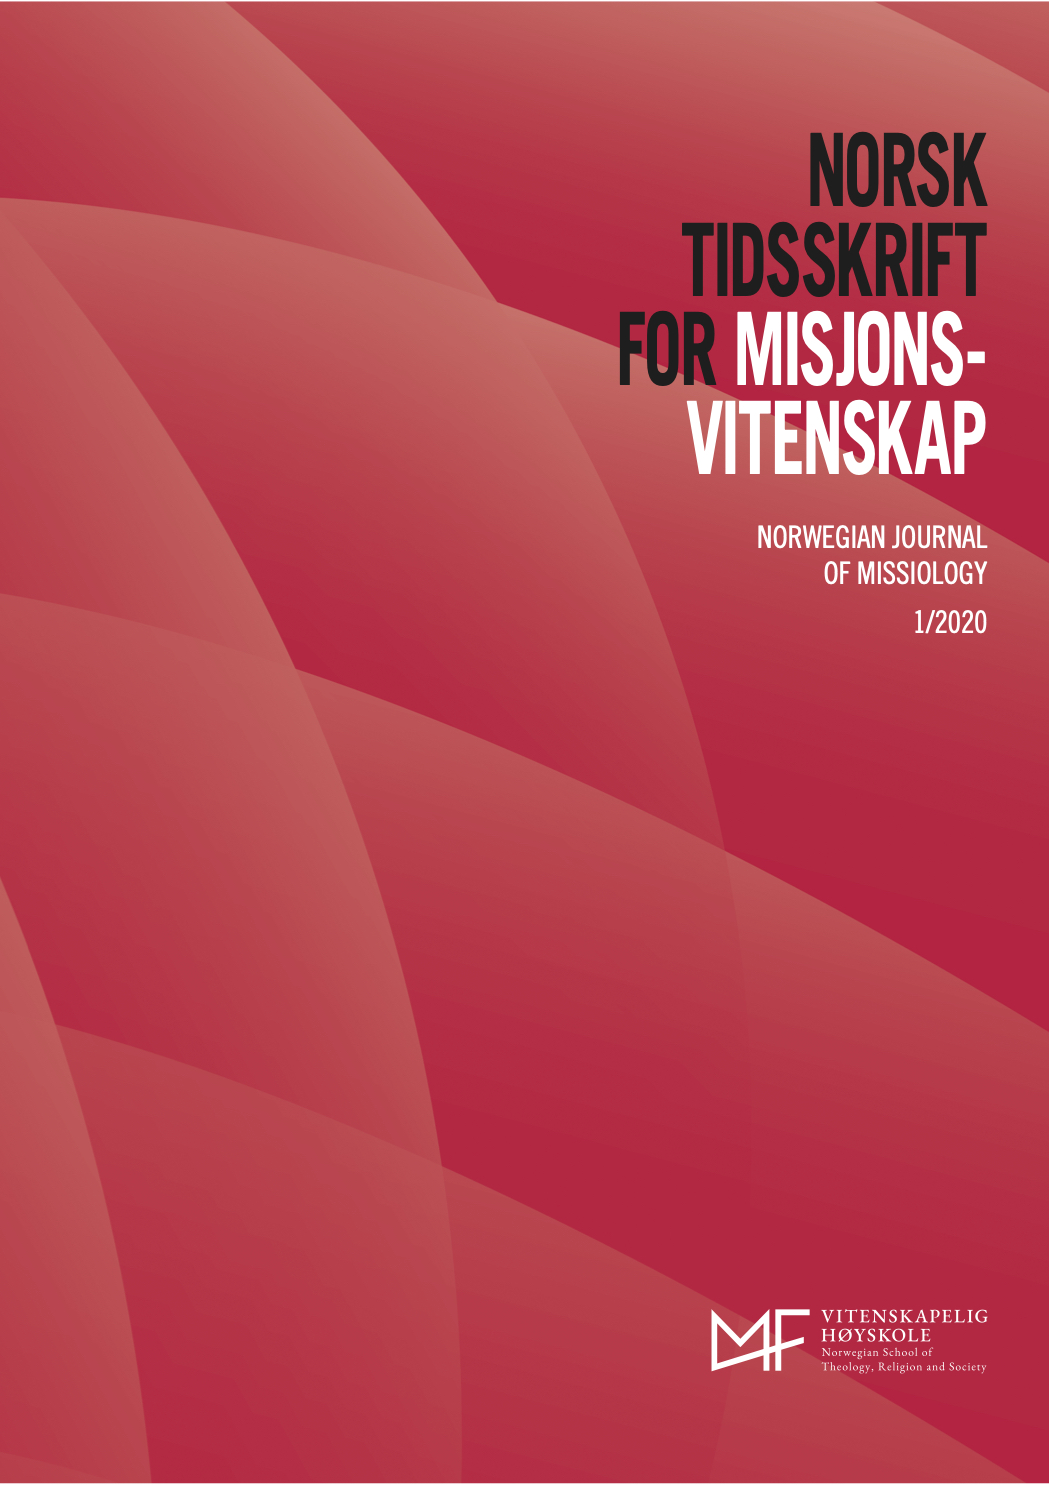 					View Vol. 74 No. 1 (2020): Norwegian Journal of Missiology
				